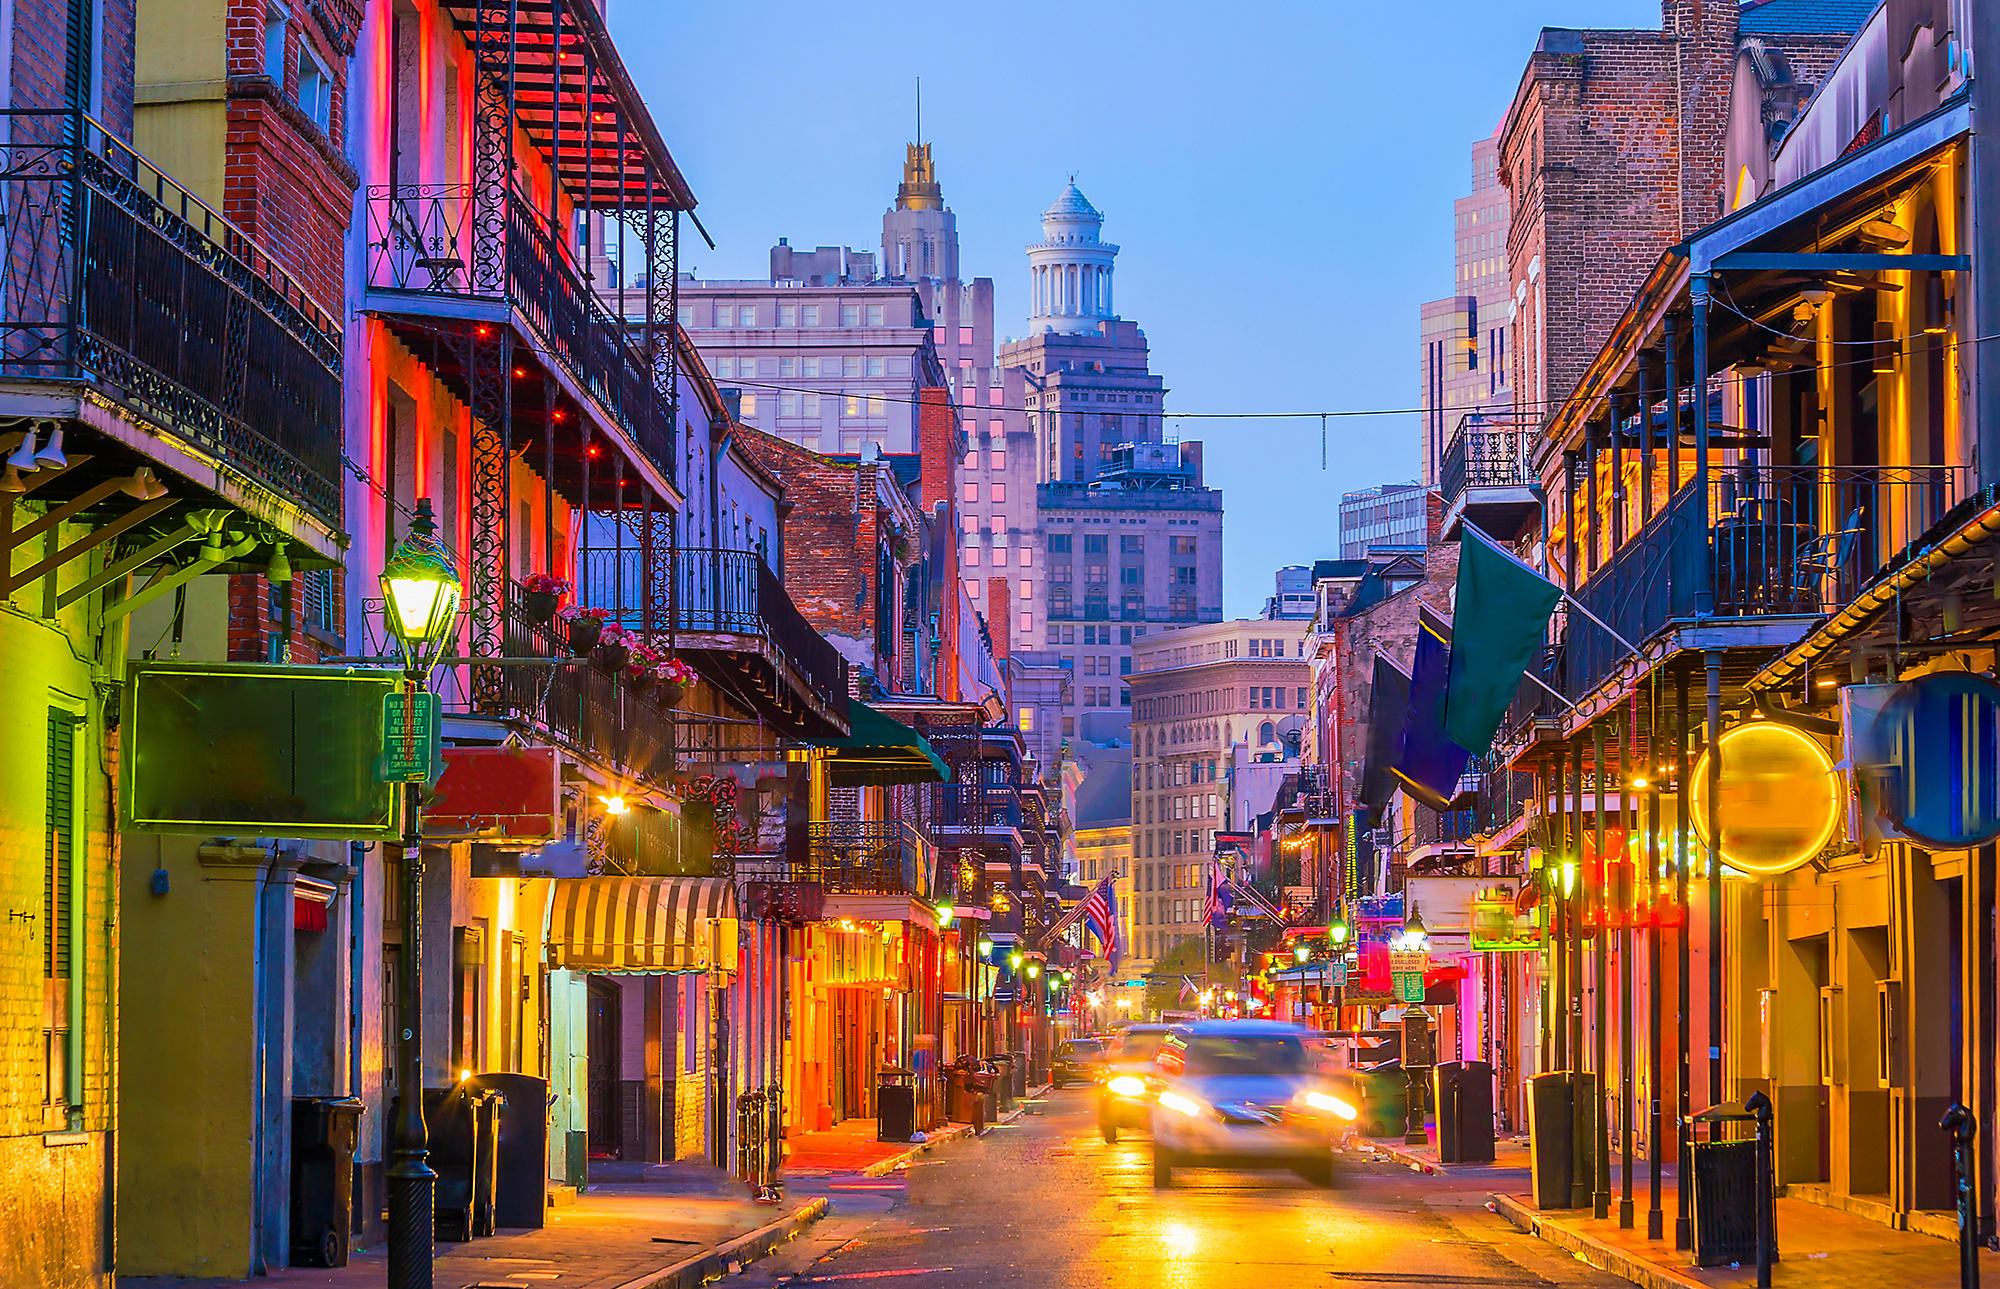 Let the Good Times Roll in The Big Easy